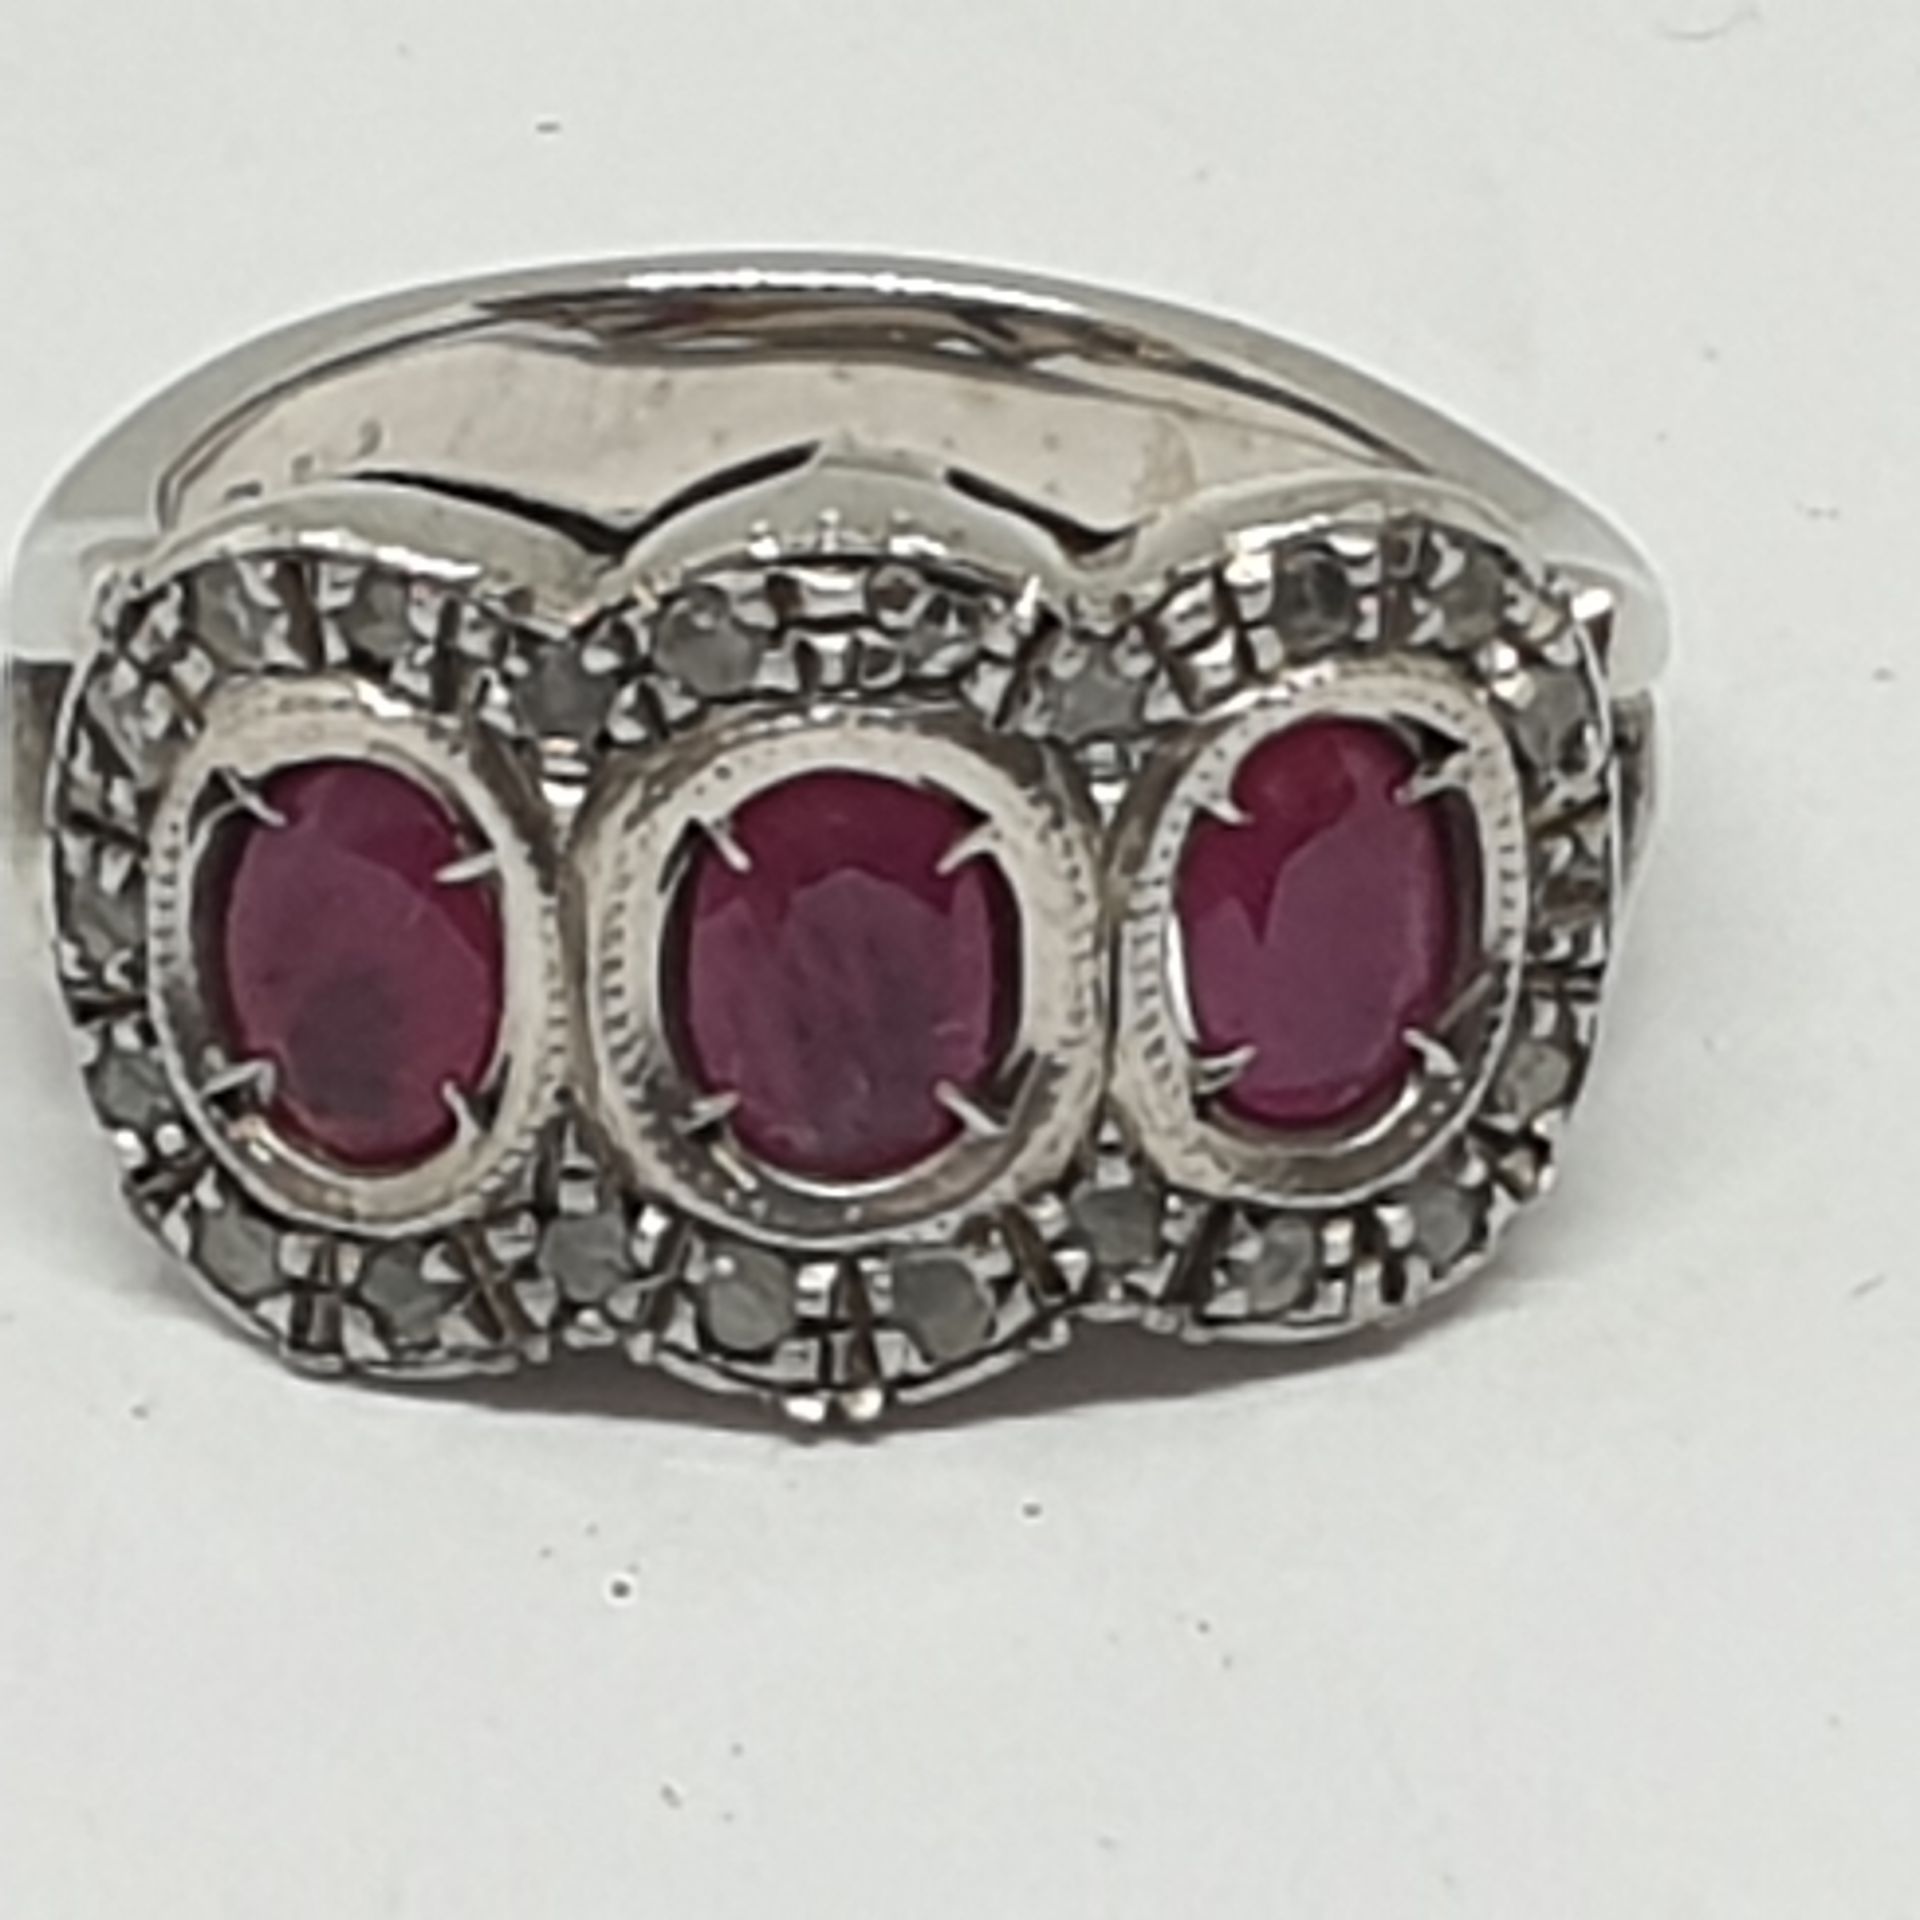 18 K GOLD RING 9.8 WITH 4 CENTRAL OVAL RUBIES FROM APPROXIMATELY 1.12 TOTAL CTS AND ROSETTE - Bild 3 aus 4